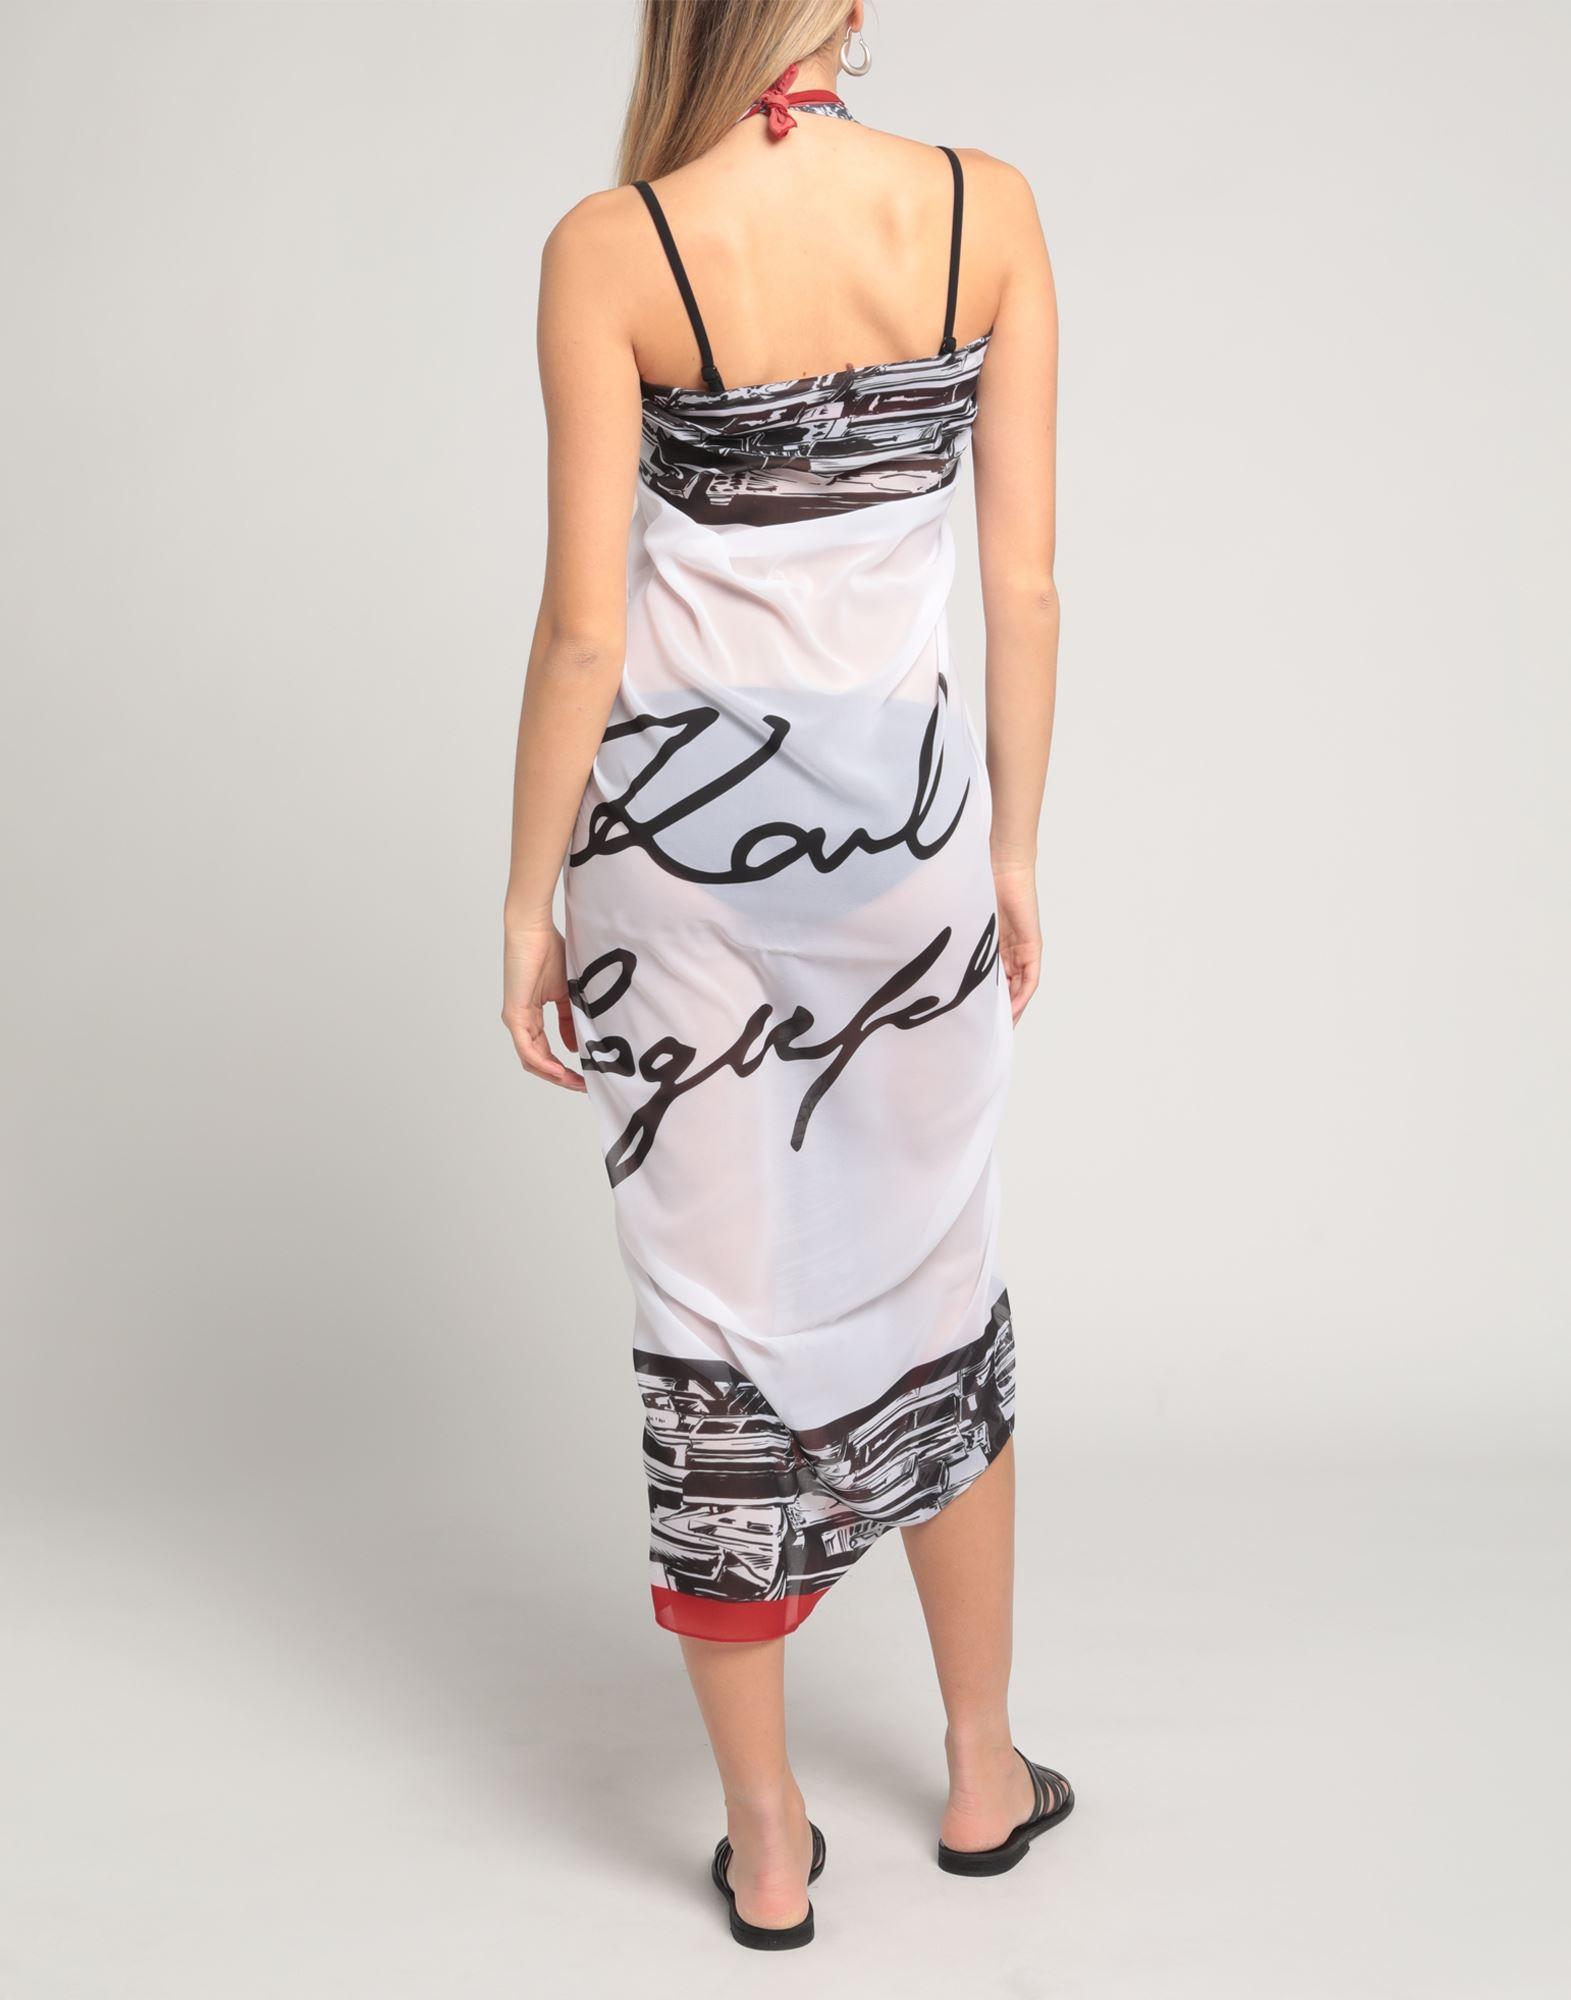 Karl Lagerfeld Synthetic Sarong in ...